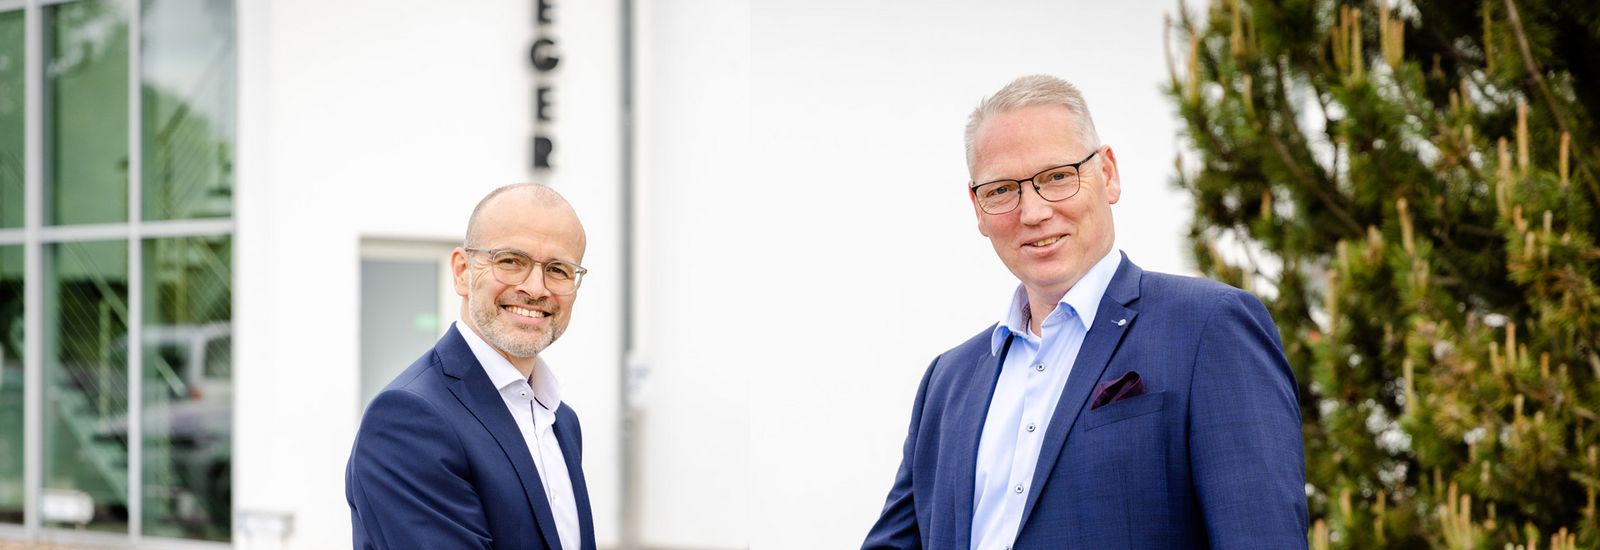 Björn Riechers to take over from Dr. Gregor Langer as Managing Director at RK Rose+Krieger GmbH from 1 June 2023.